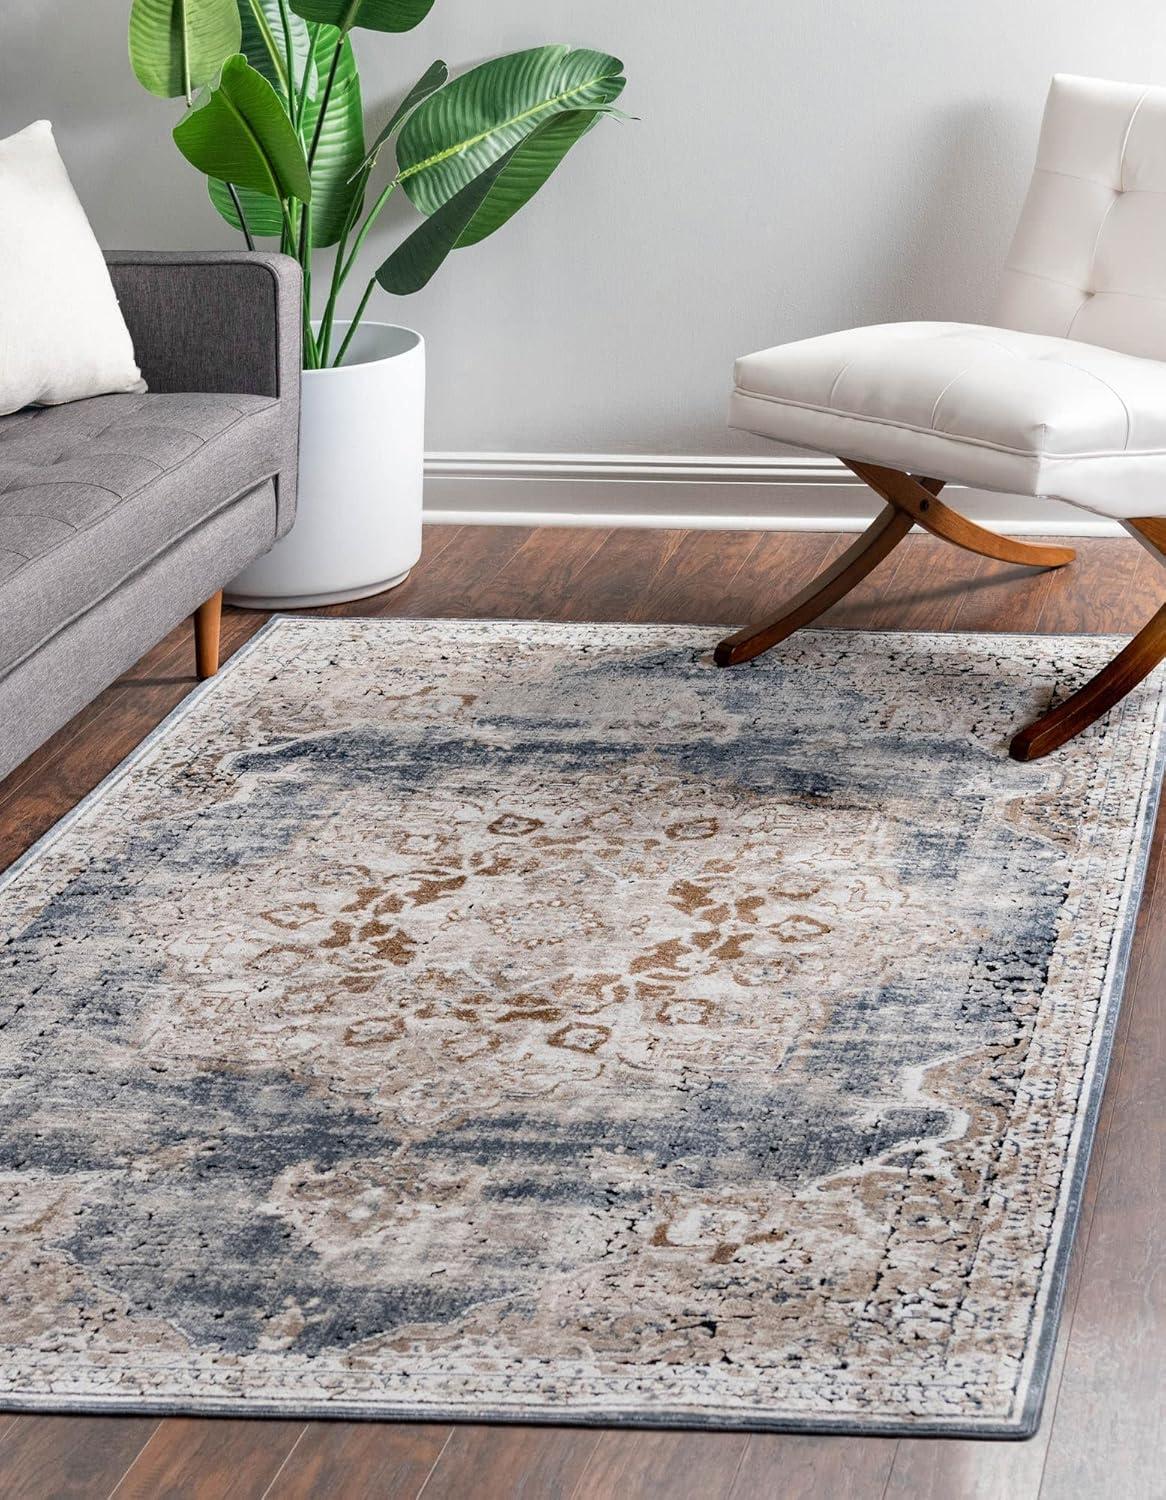 Beige & Light Blue Easy-Care Stain-Resistant Synthetic Area Rug, 6' x 9'